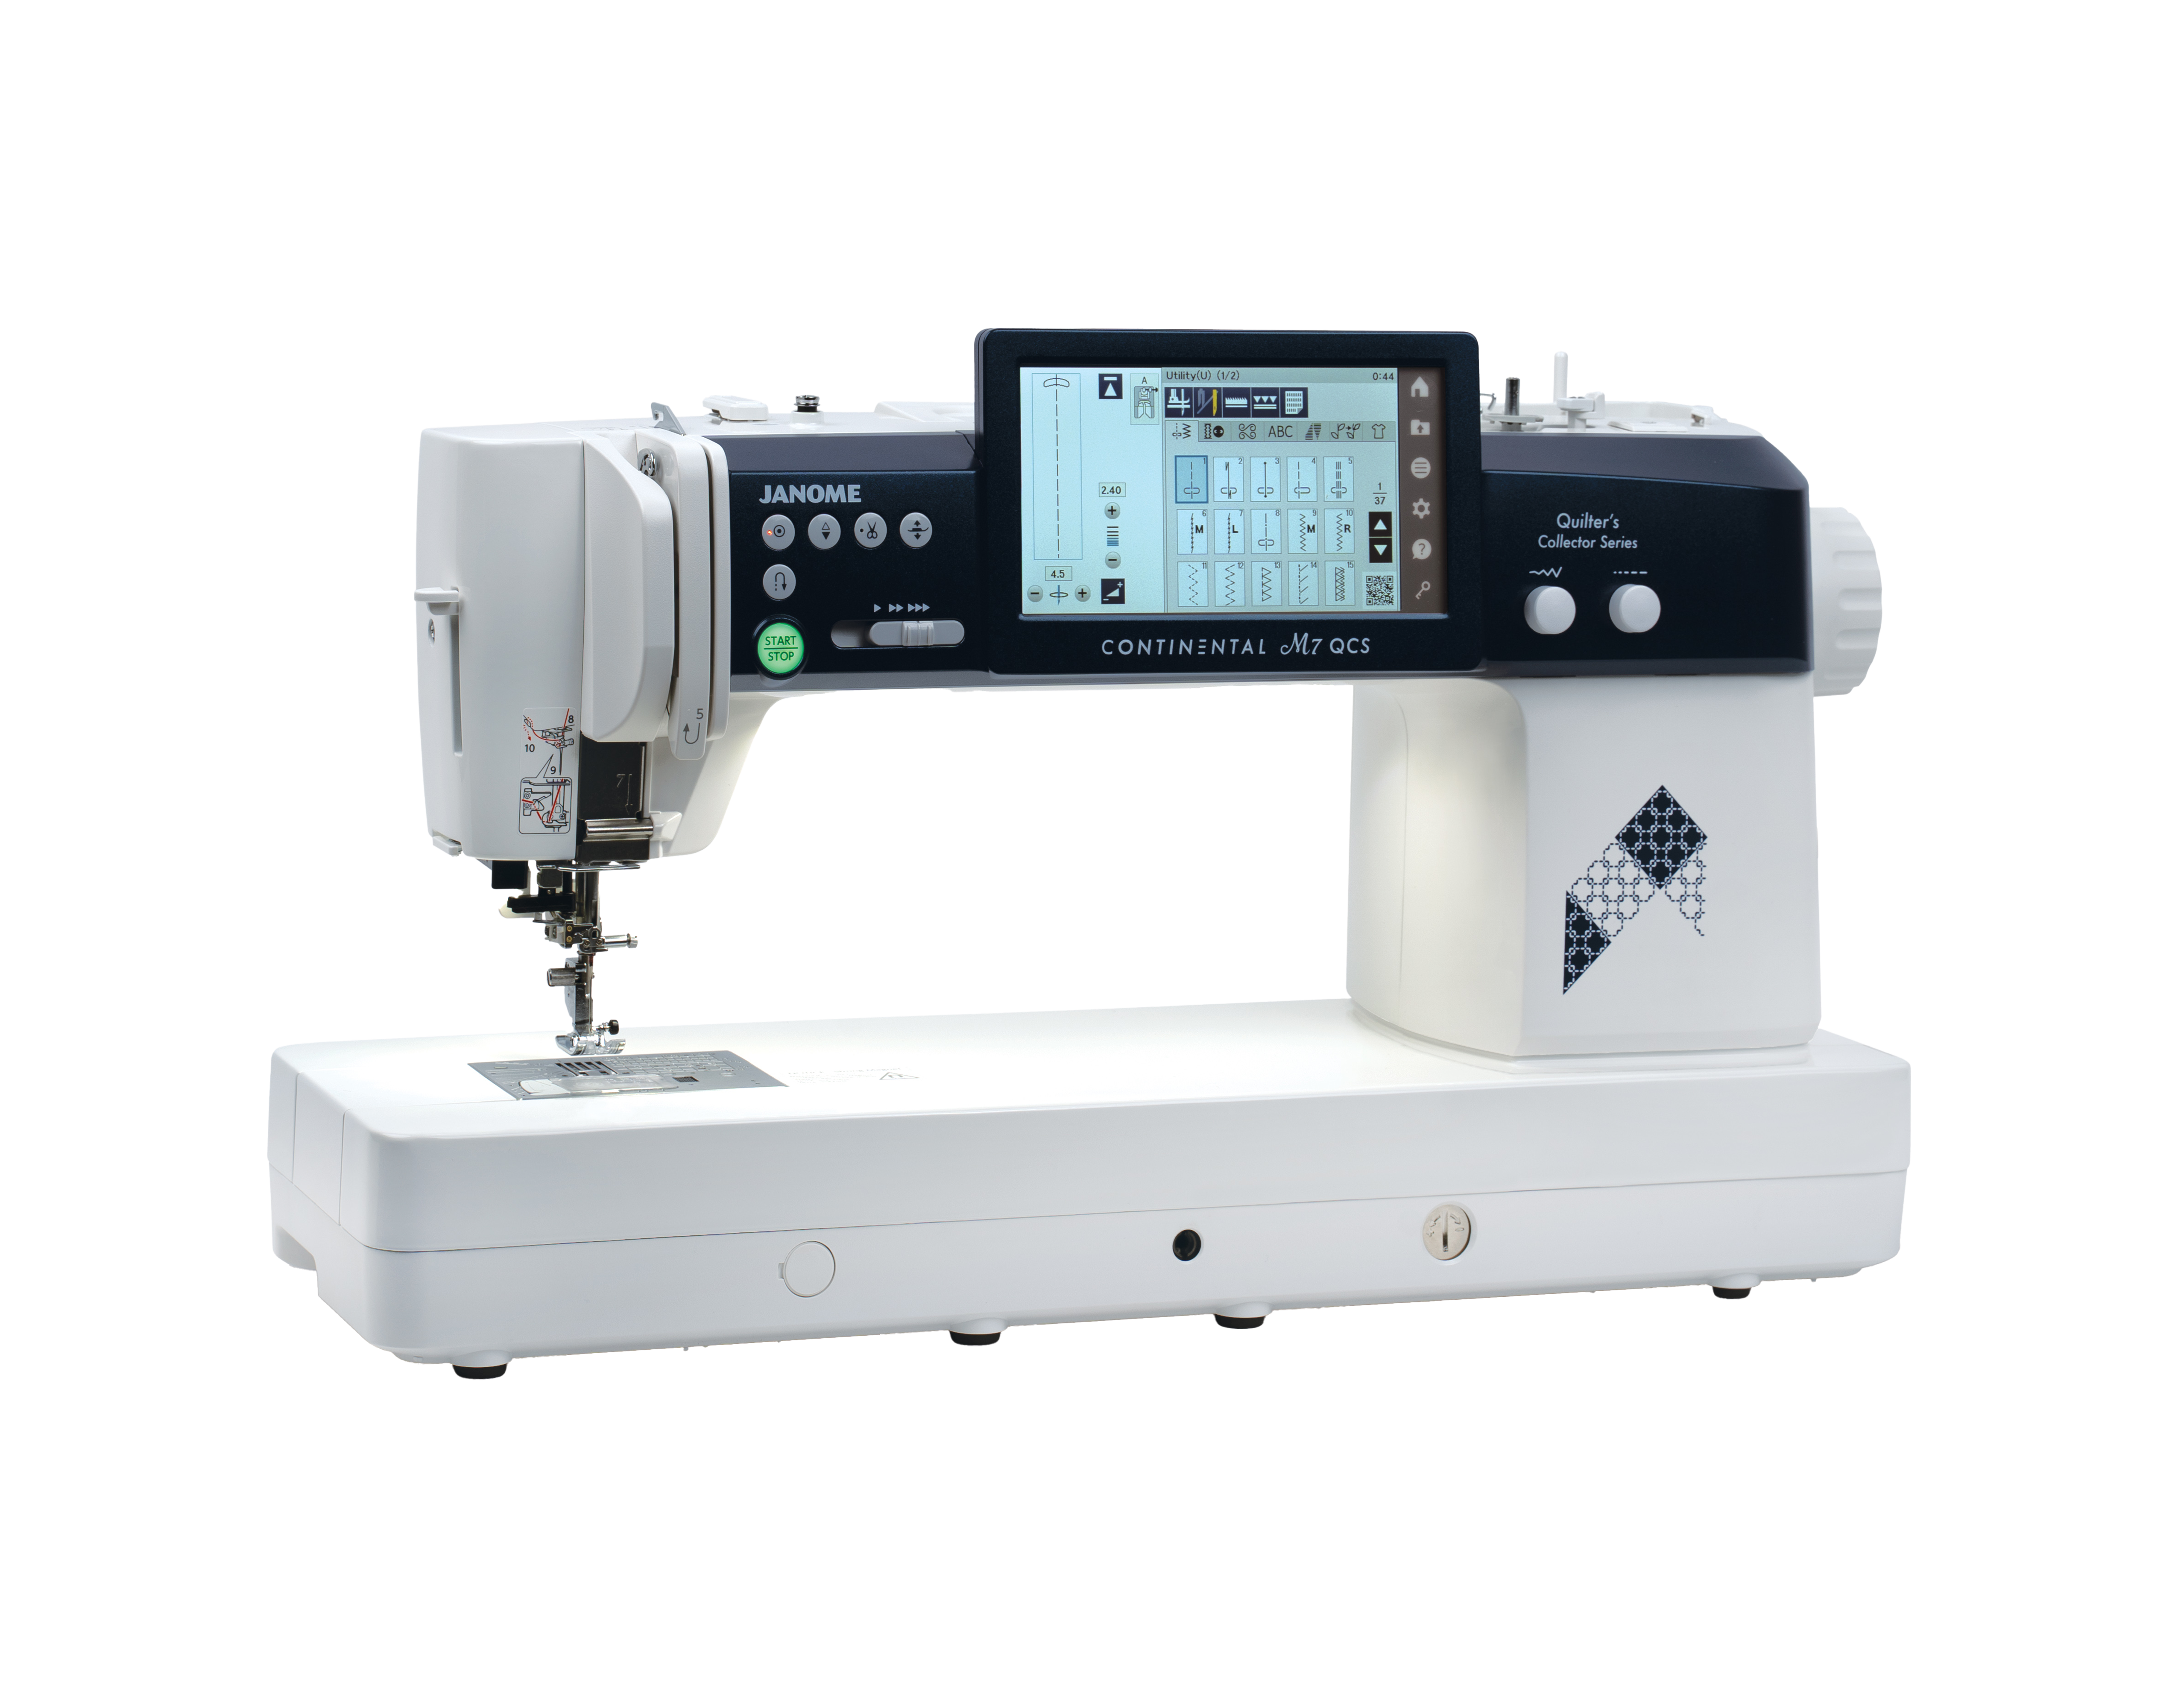 Janome Continental M7 Quilter's Edition Sewing and Quilting Machine for Sale at World Weidner